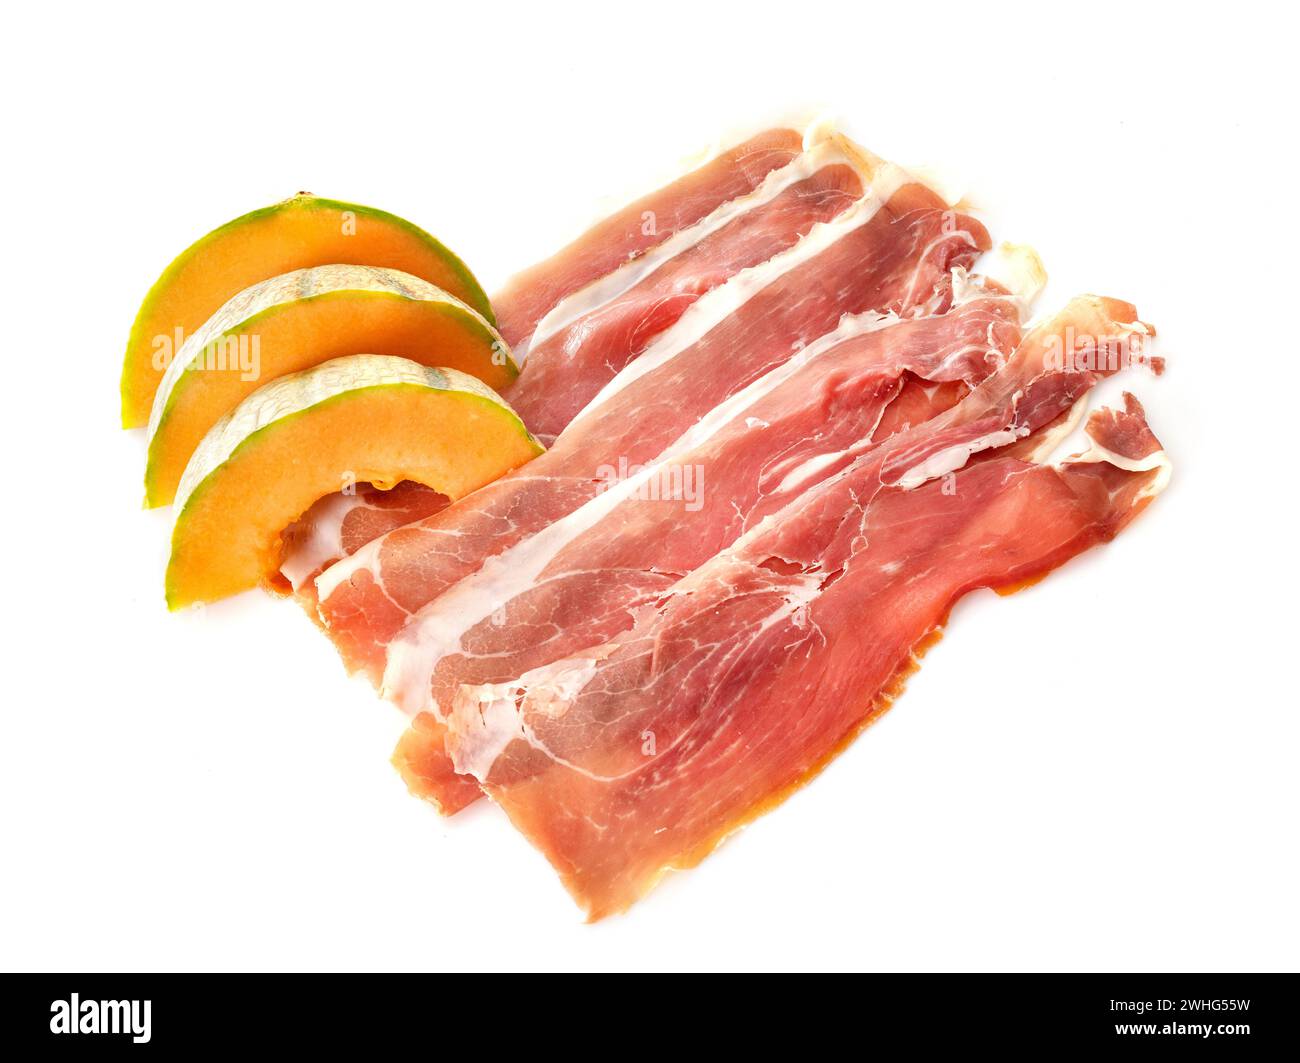 slice of cured ham serano and melon in front of white background Stock Photo